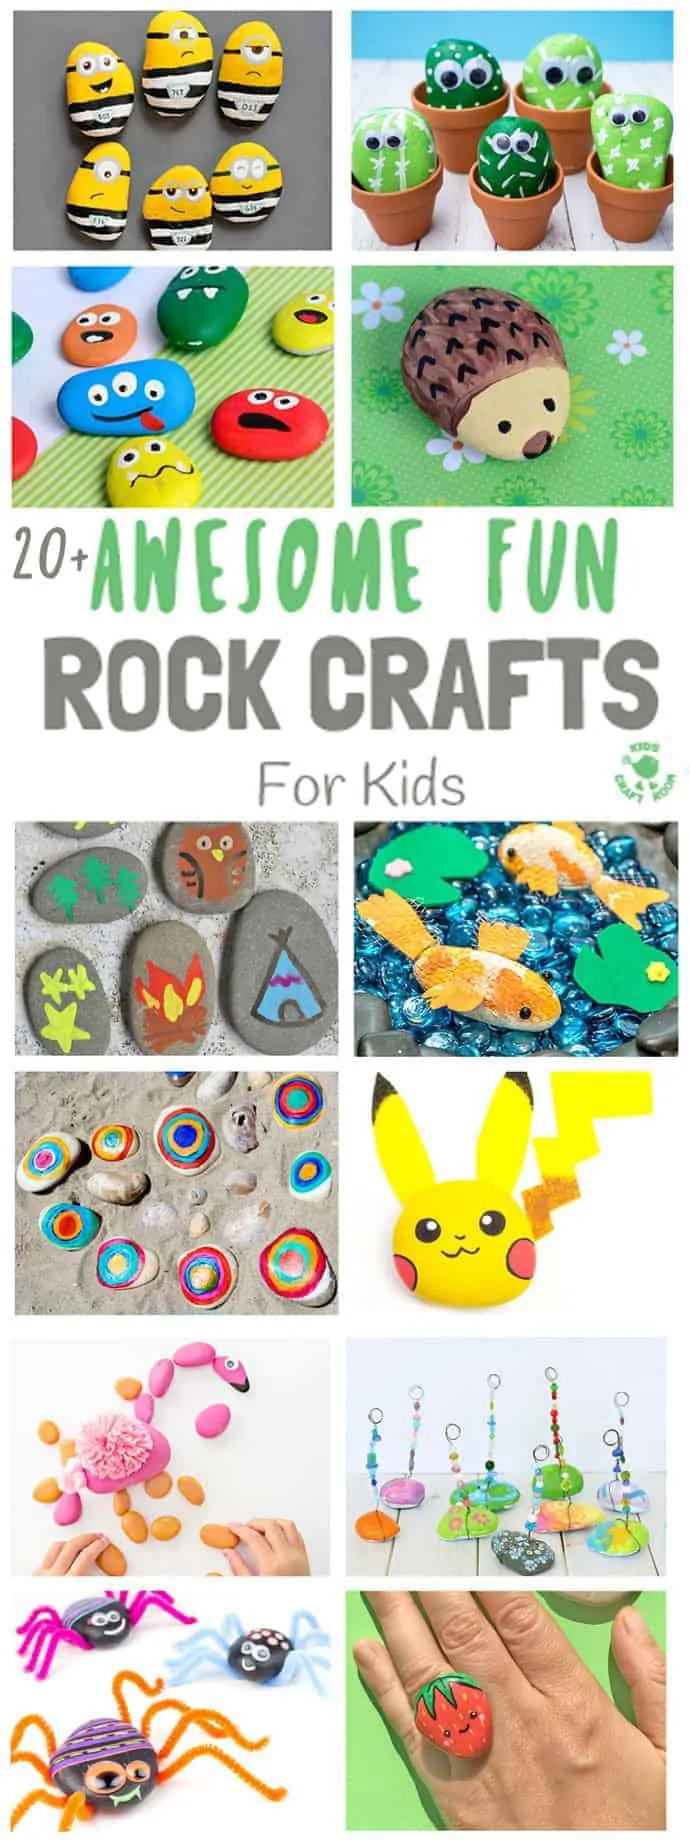 COOL KIDS ROCK CRAFTS - Do your kids love collecting pebbles? If you've got a little Nature collector then you'll love 20+ Awesome Fun Rock Crafts For Kids. These rock painting ideas make fantastic rock activities for fun all year round! #naturecrafts #rockcrafts #paintedrocks #pebblecrafts #rocks #pebbles #stones #kidscrafts #craftsforkids #summercrafts #kidsactivities #summeractivities #beachcrafts #kidscraftroom